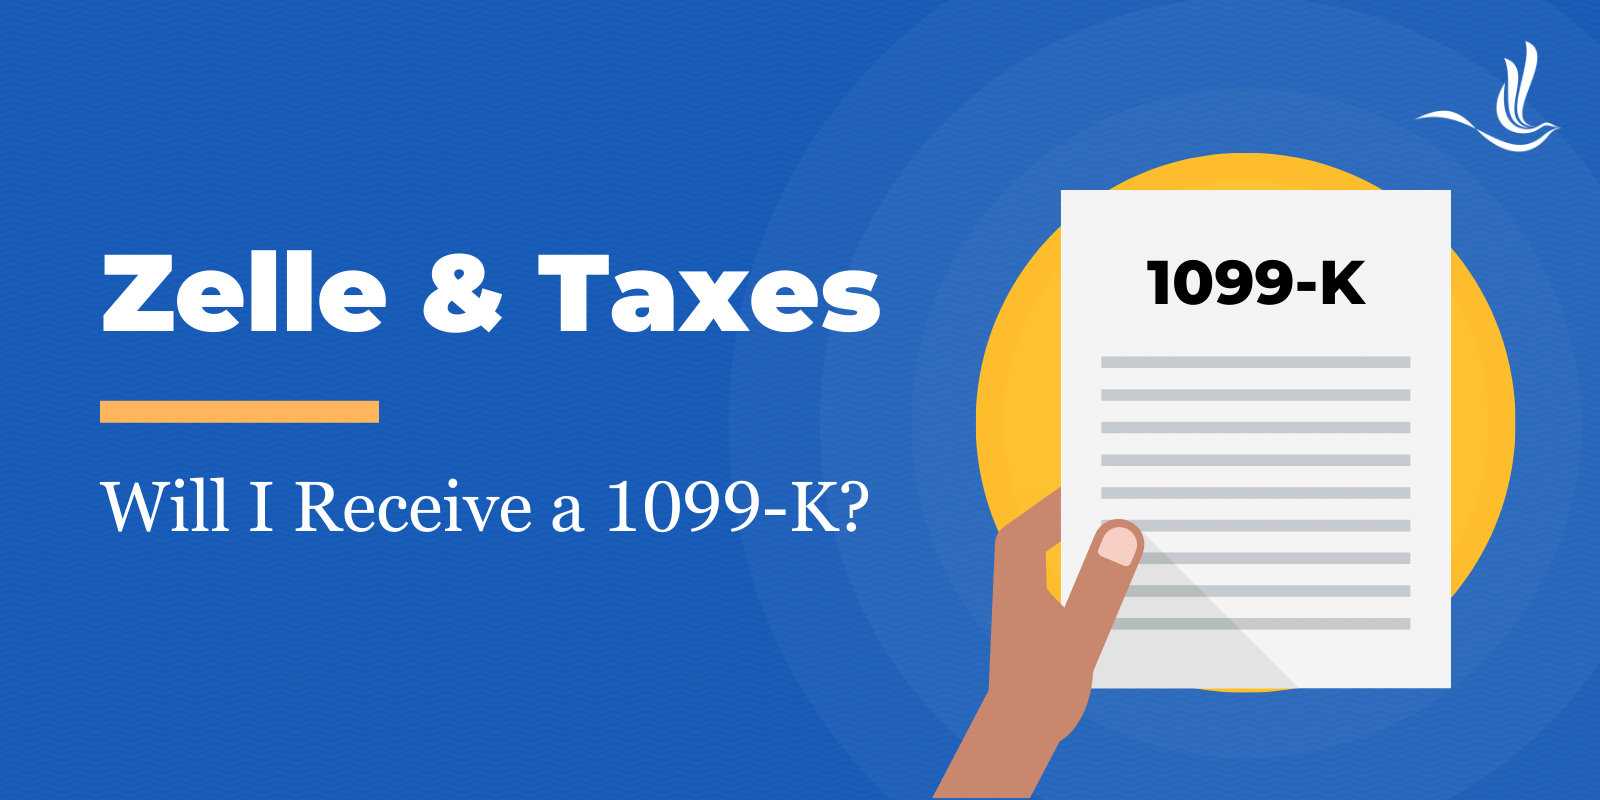 zelle and taxes: will i receive a 1099-k?